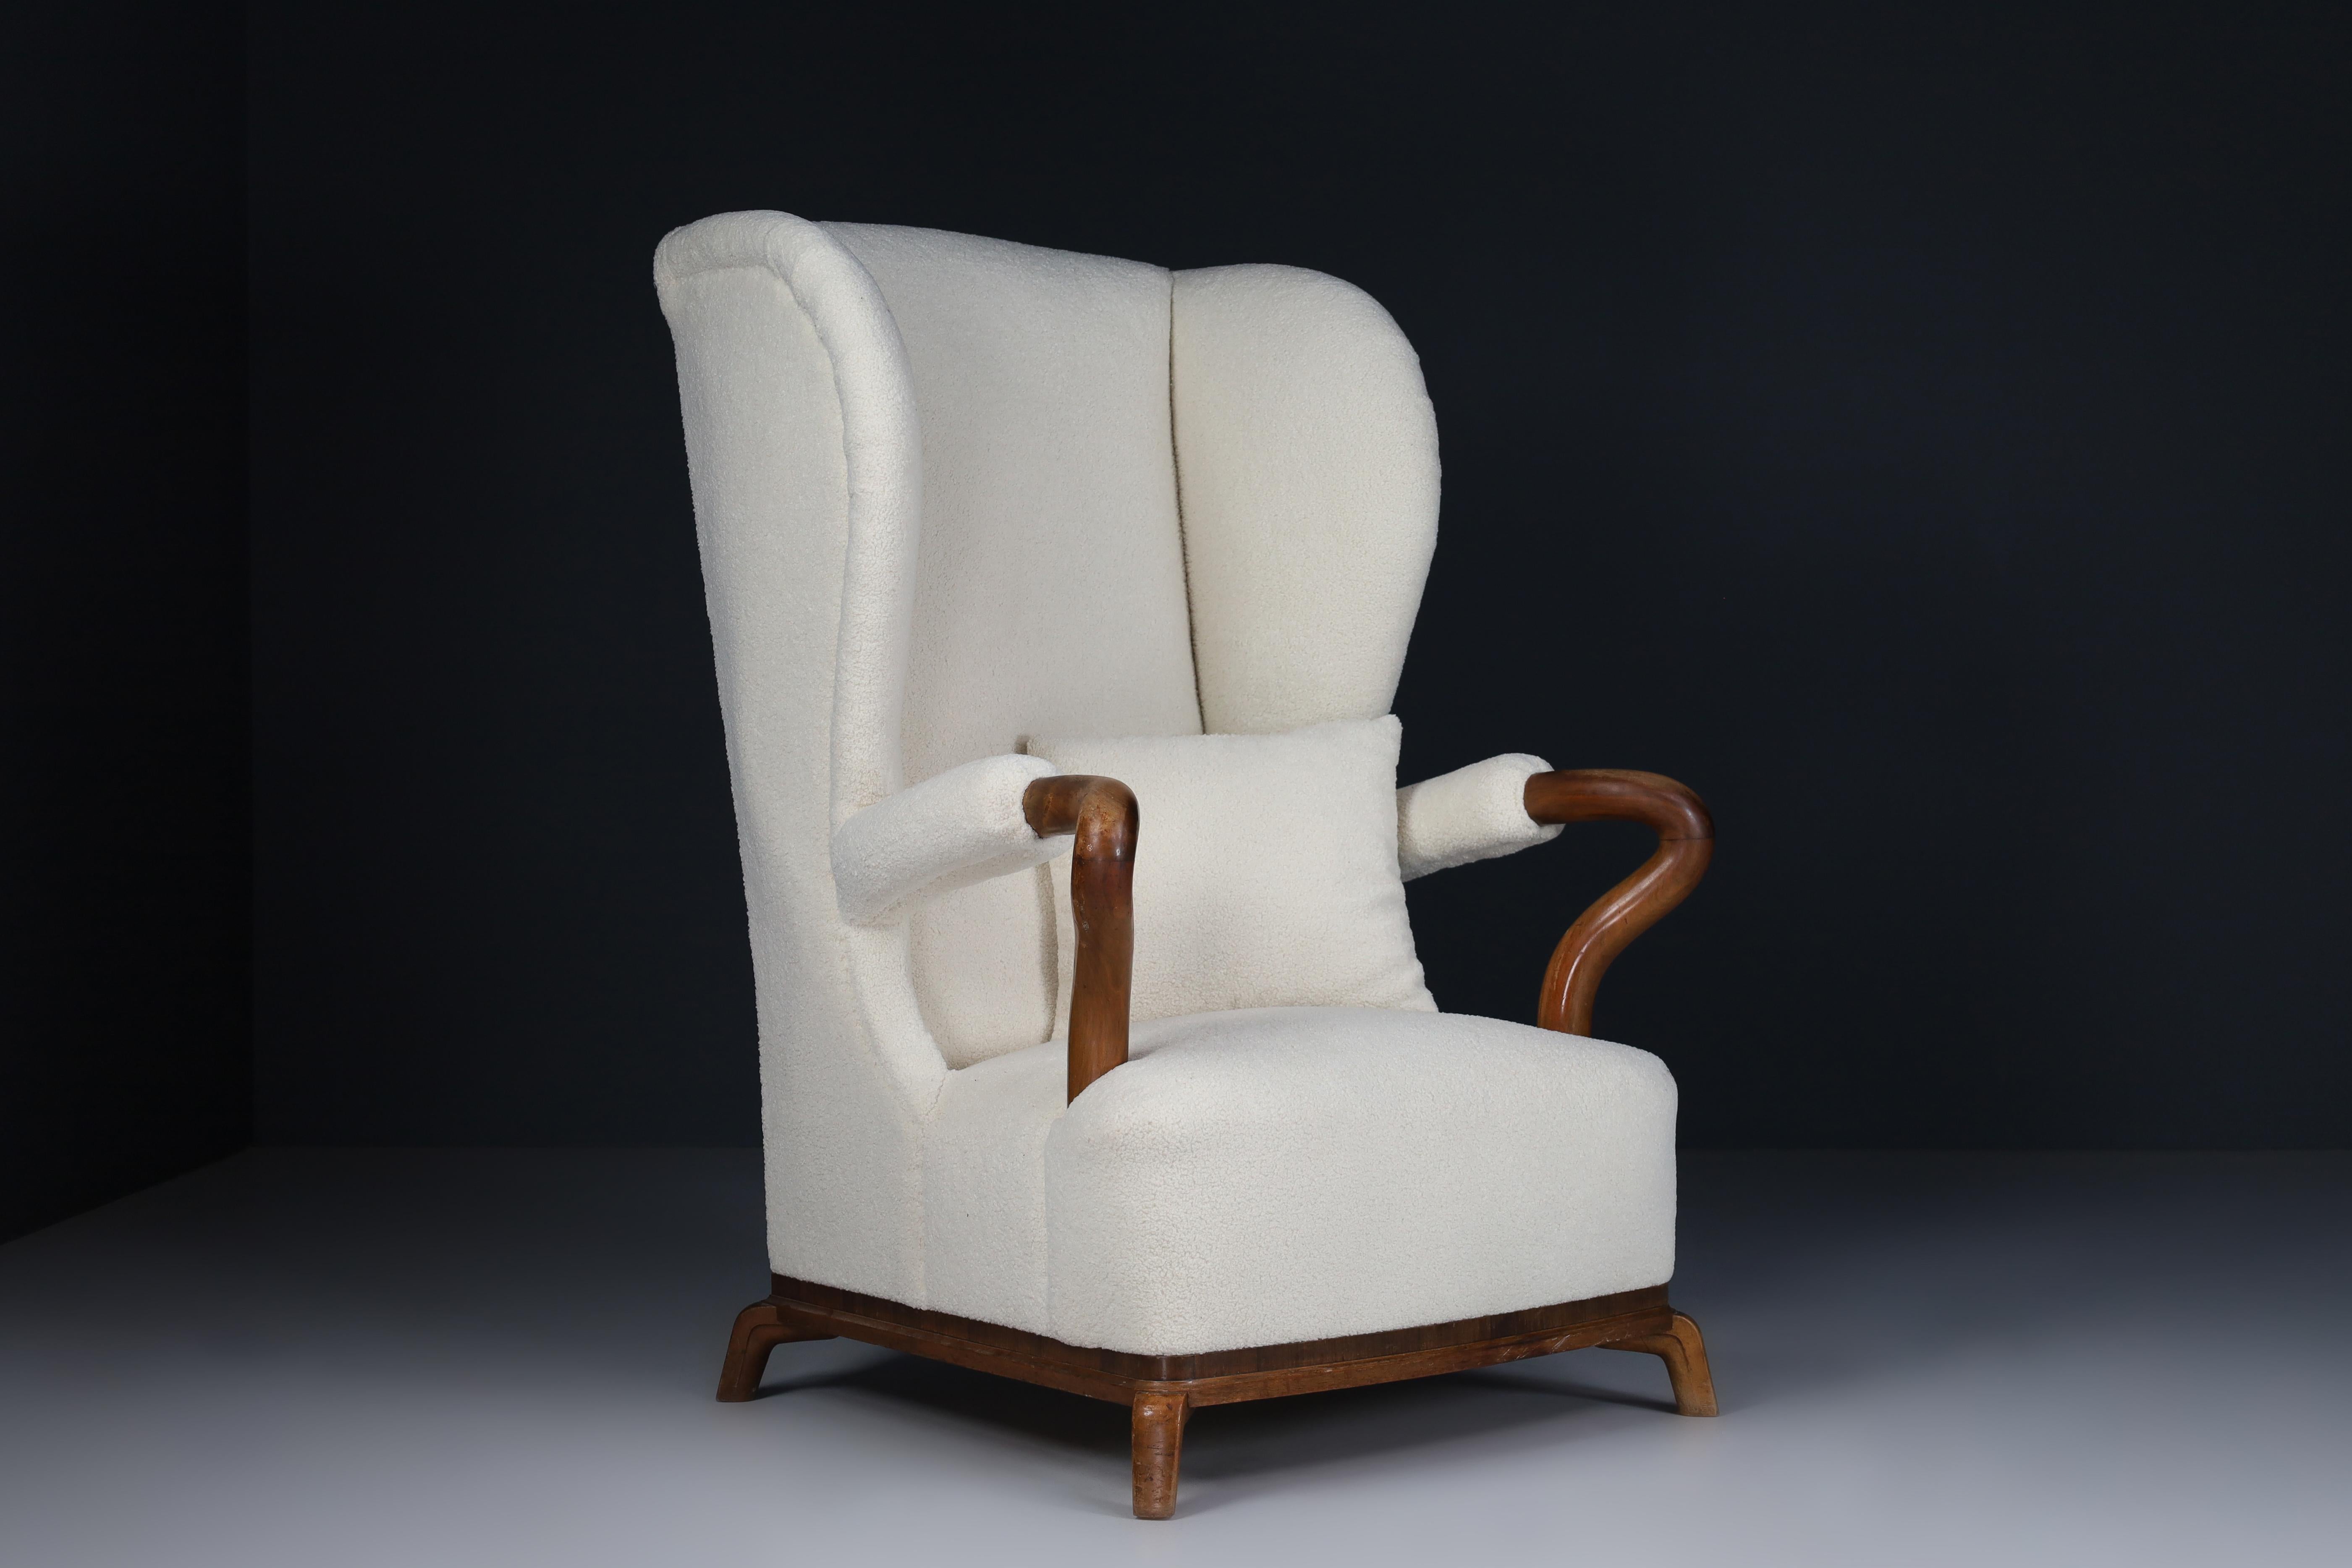 Large monumental midcentury wingback walnut armchair in re-upholstered teddy fabric, France 1930s. This large armchair would be an eye-catching addition to any interior, such as a living room, family room, screening room or office. It also perfectly